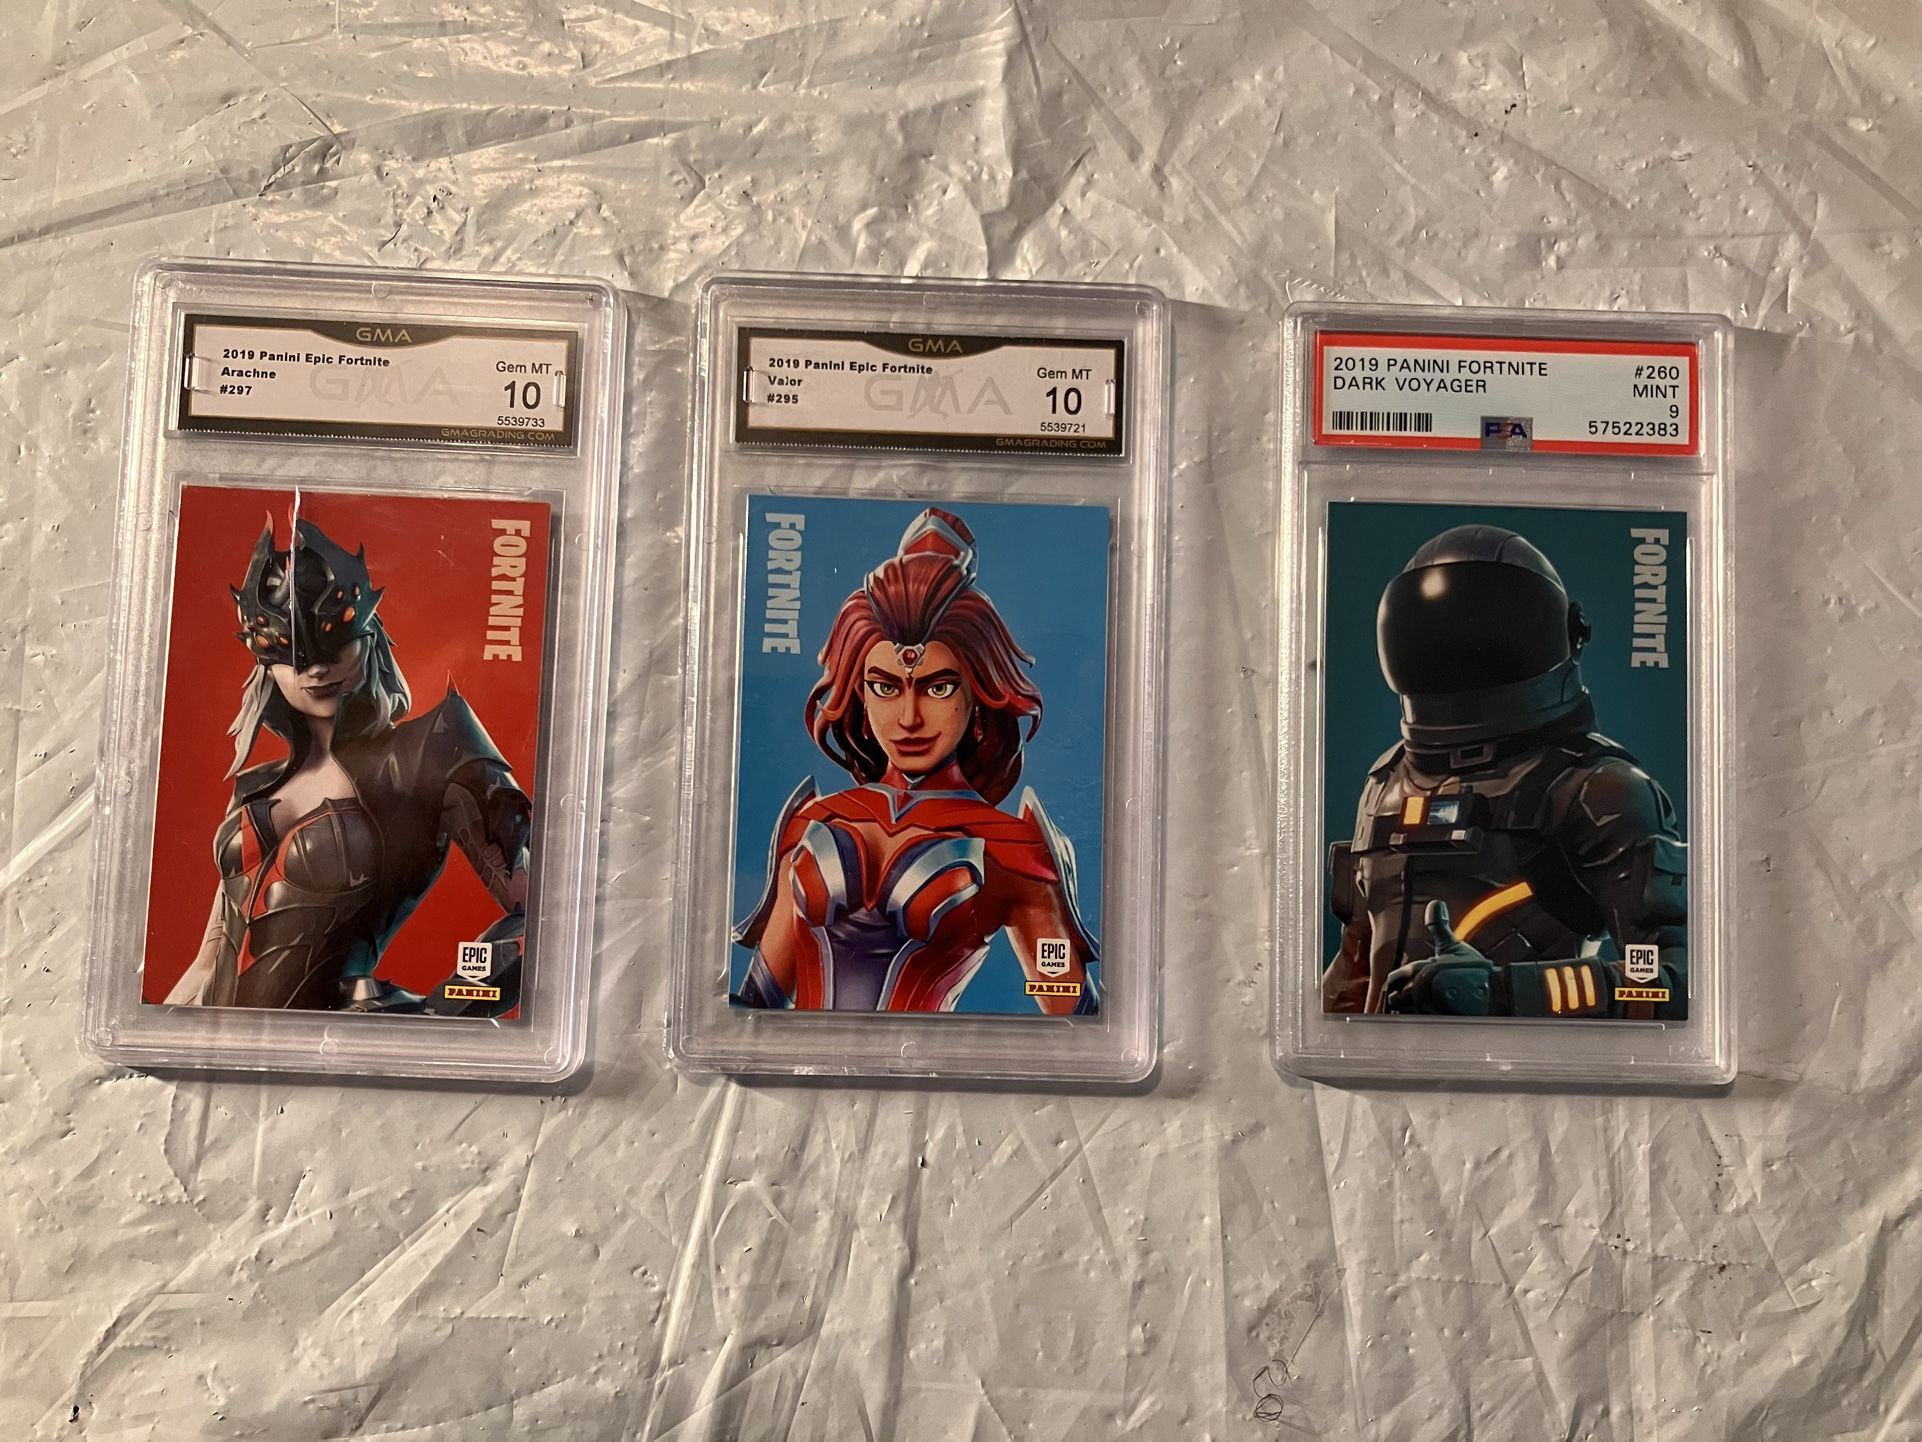 3 Fortnight Graded Cards (1 Frame Is A Little Cracked)